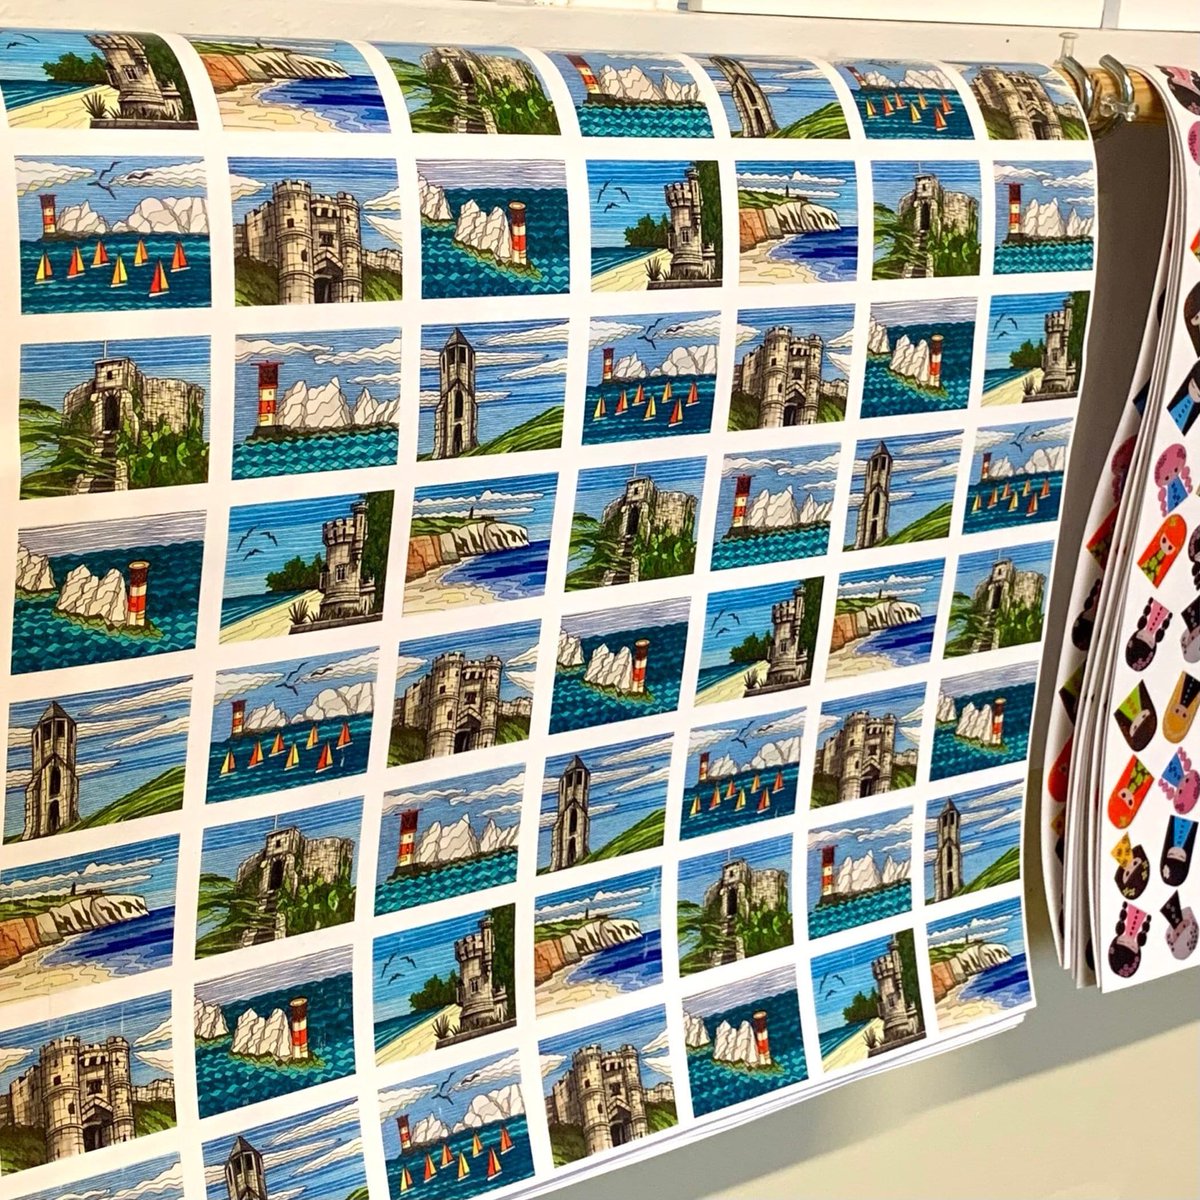 My original #isleofwight wrapping paper is available in store at Holliers Tunnel Market and at Ztam & Co here on the Isle of Wight 🏝️ also online at deejavuart.etsy.com/listing/138492…

#originalart #giftideas #iow #shopindie #artgifts #deejavuart #isleofwightartist #etsyuk